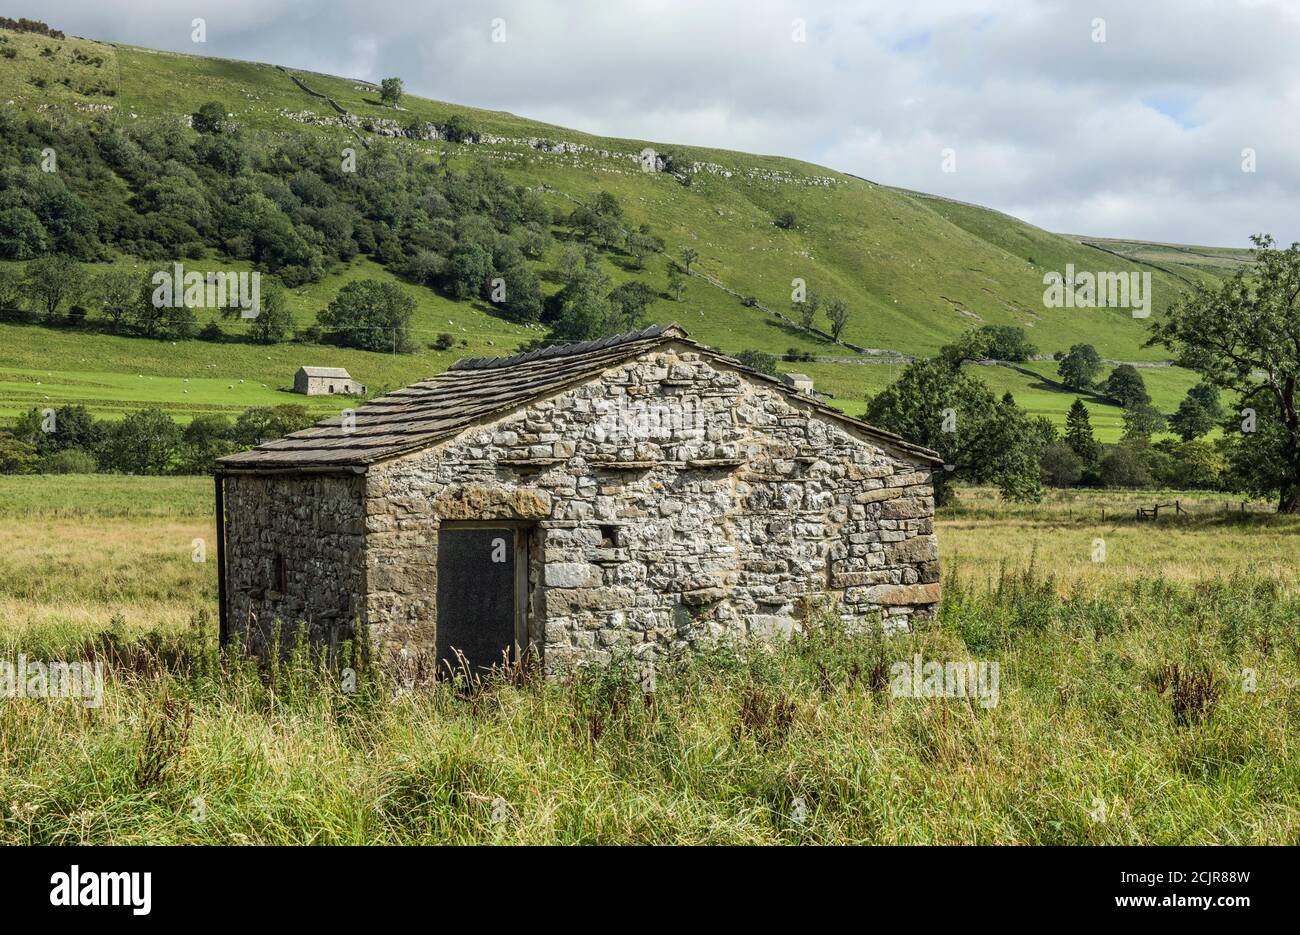 A Wharfedale barn in Upper Wharfedale in the Yorkshire Dales National Park, near the beautiful village of Buckden. Dales barns really add to the views Stock Photo